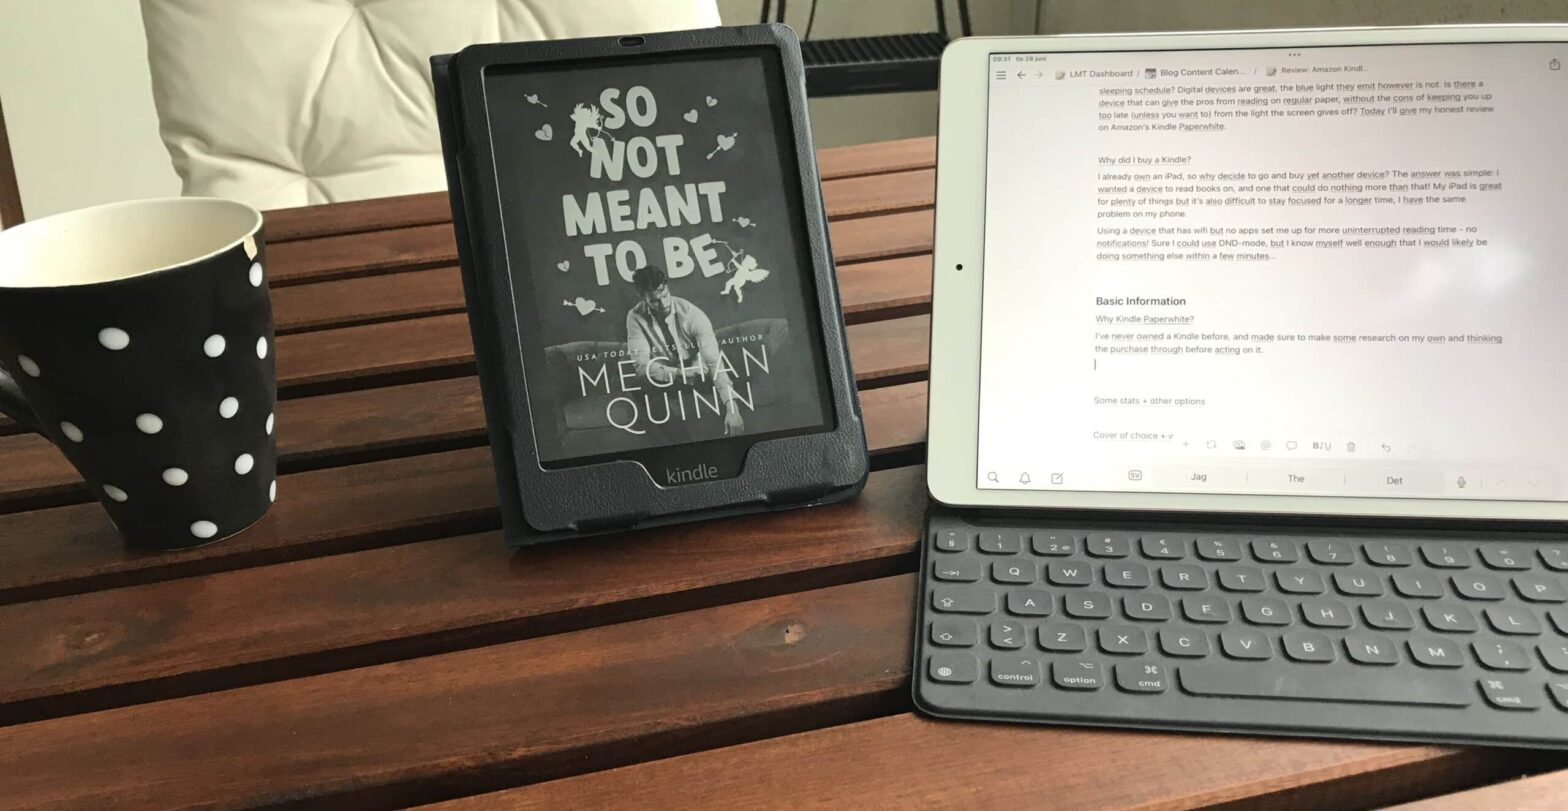 Photo showing a coffee cup, Kindle and an iPad.